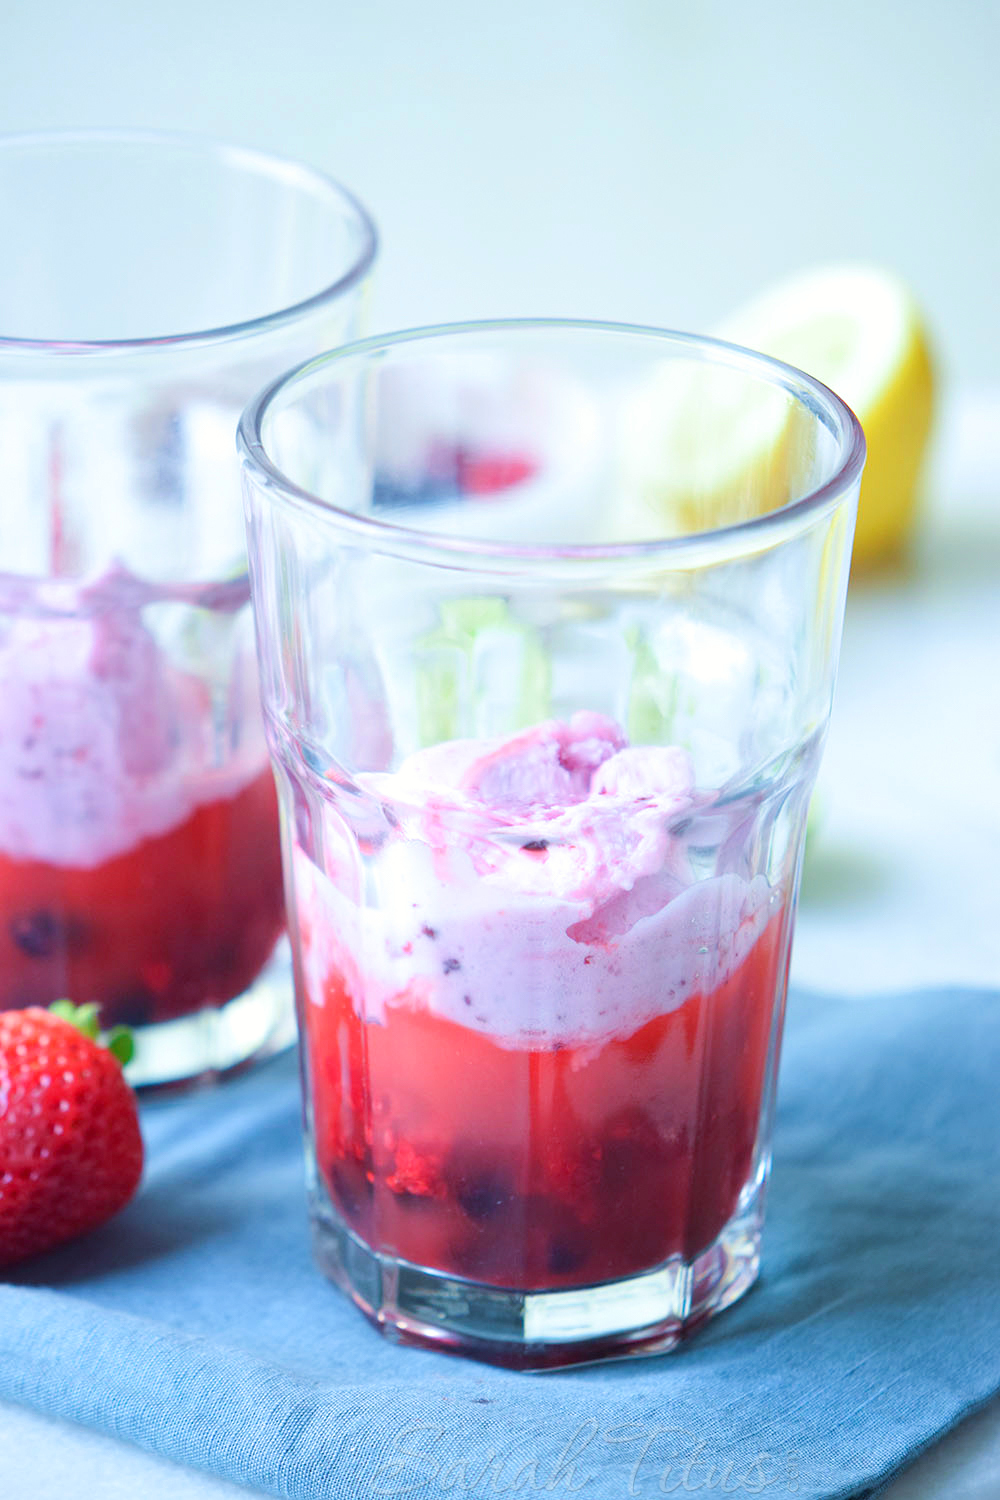 2 Scoops of ice cream over top of the berries and juice in glasses